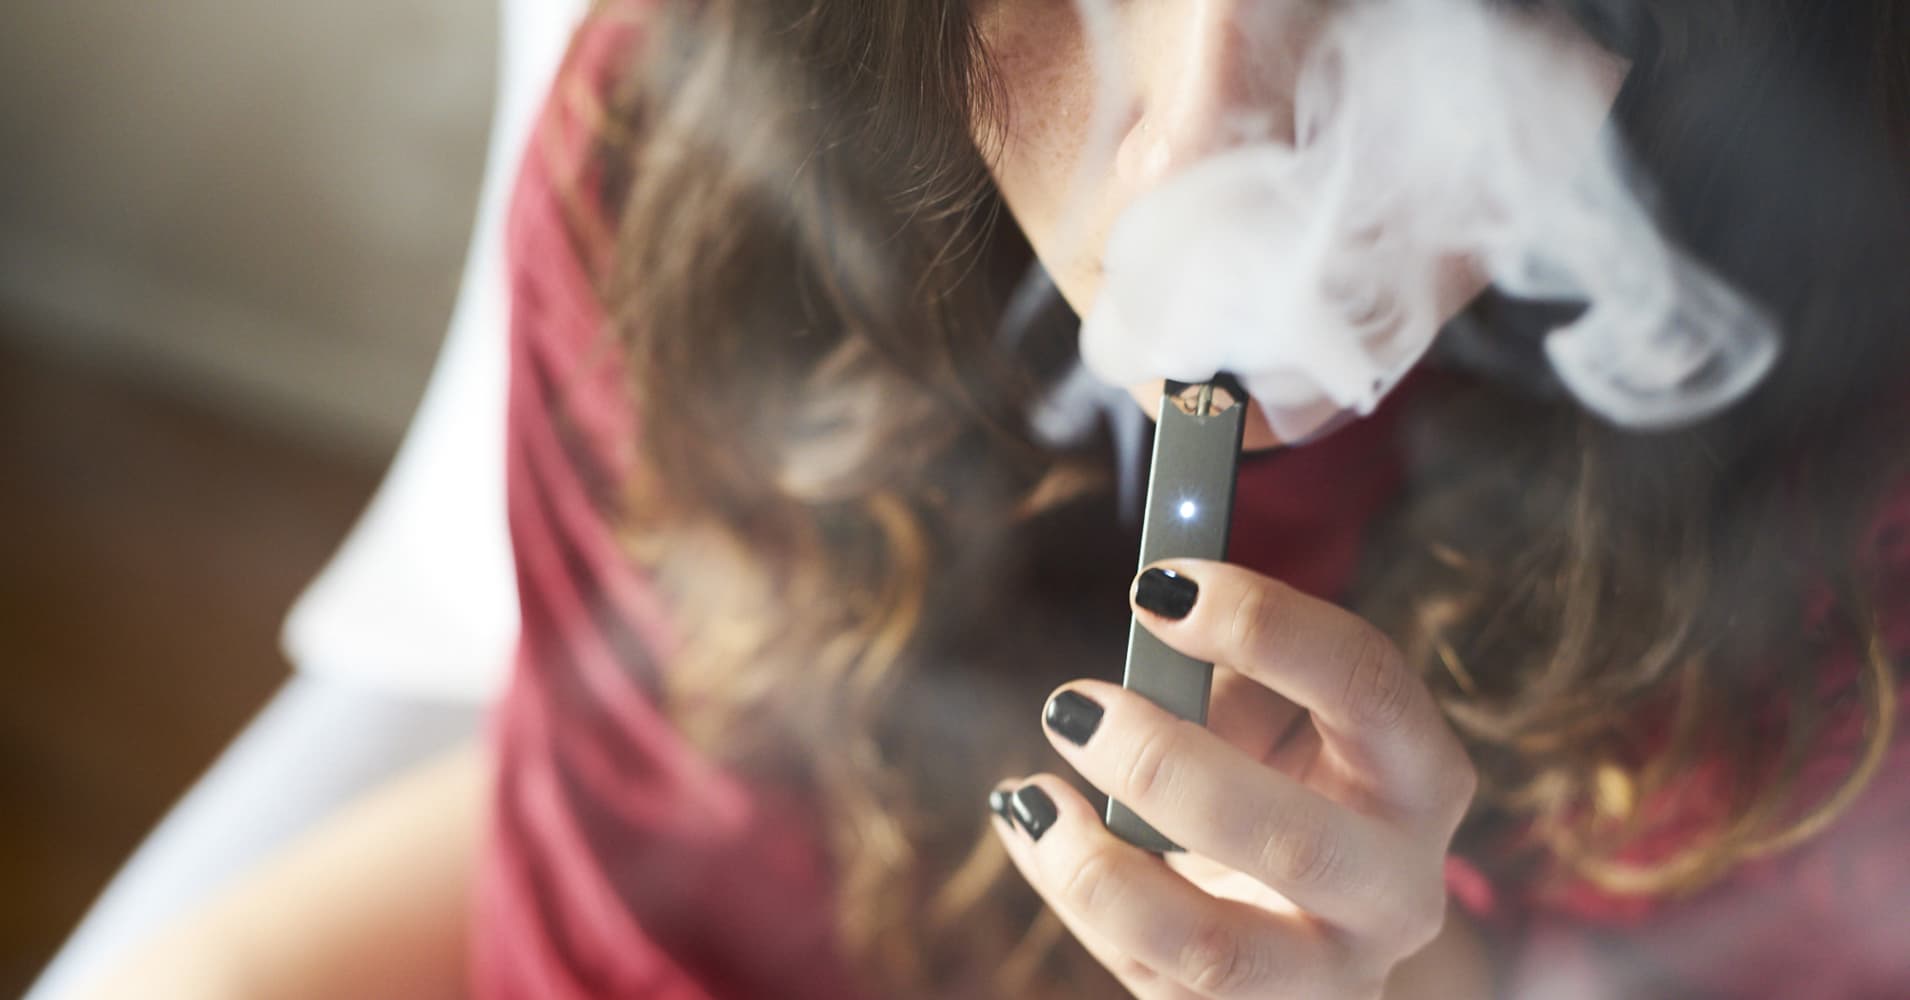 Teen e-cigarette use surged 75 percent in the past year, threatening booming US market